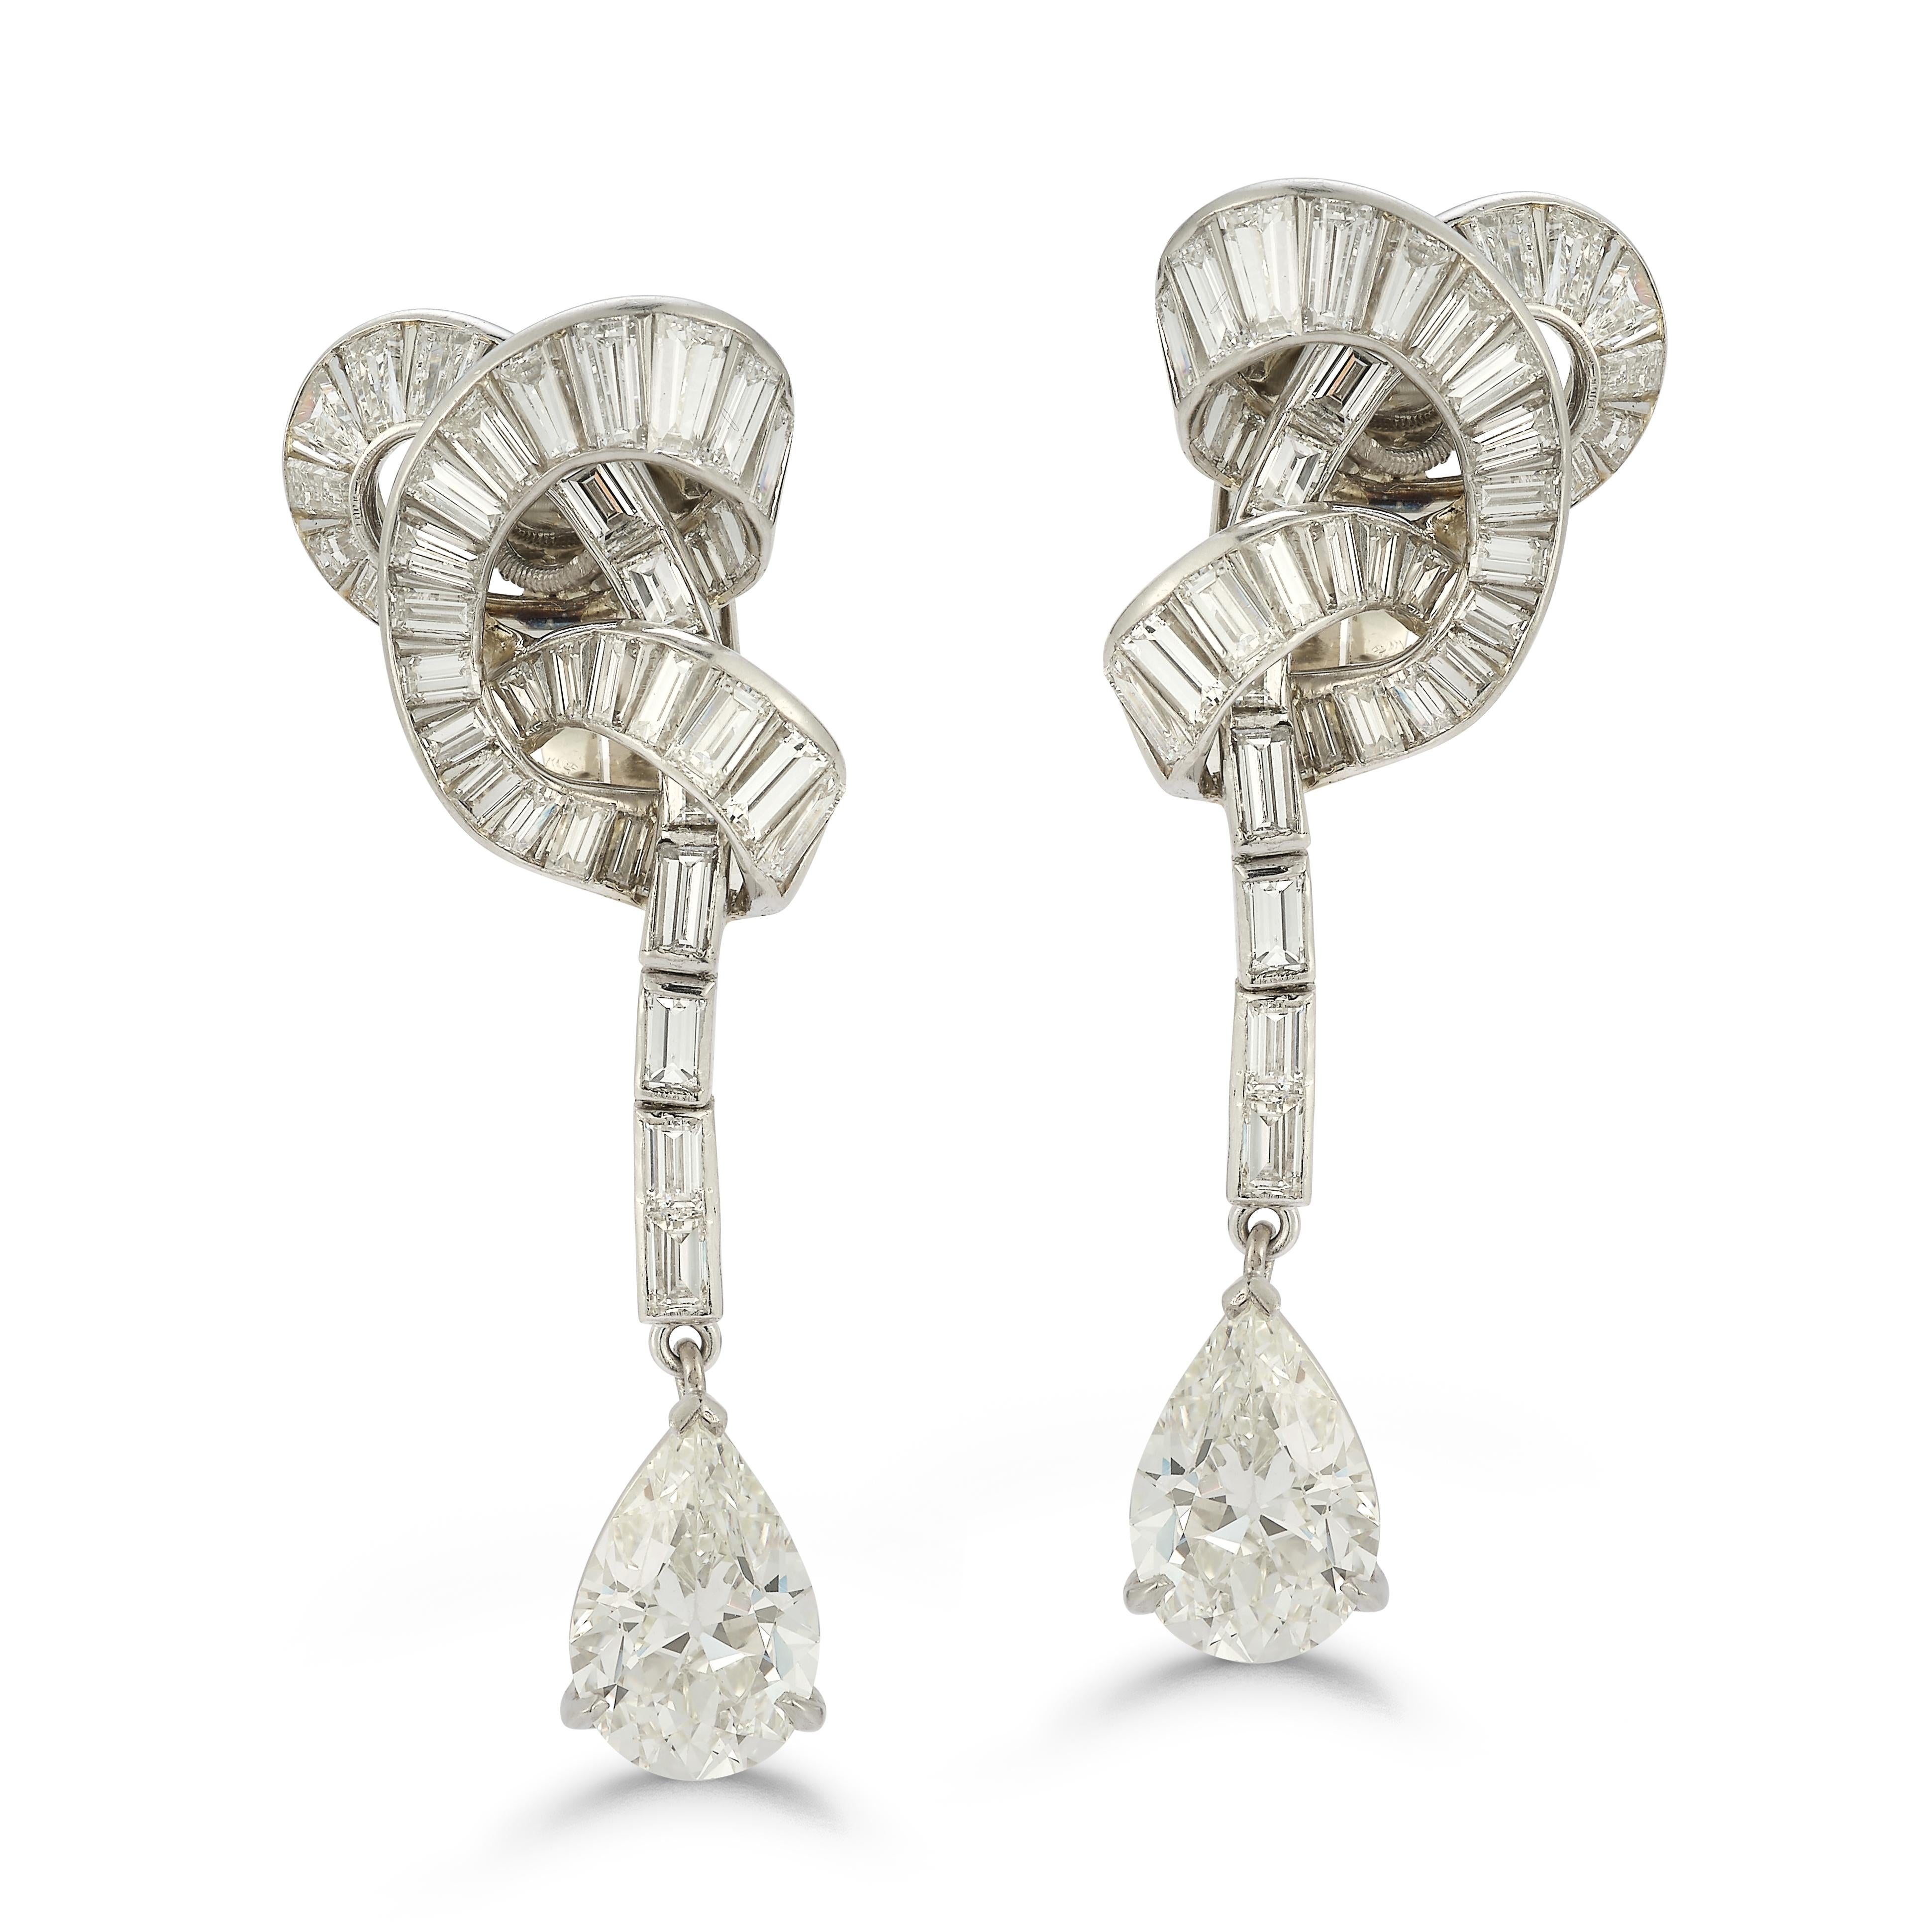 Van Cleef Pear Shape Diamond Earrings

Pear shape diamonds hanging from a knot of baguette diamonds set in platinum and white gold

Pear Diamond weight: 2.63ct J VS1 and 2.88ct K VS1
Baguette Diamonds weight: approximately 7.75ct
Total Diamond